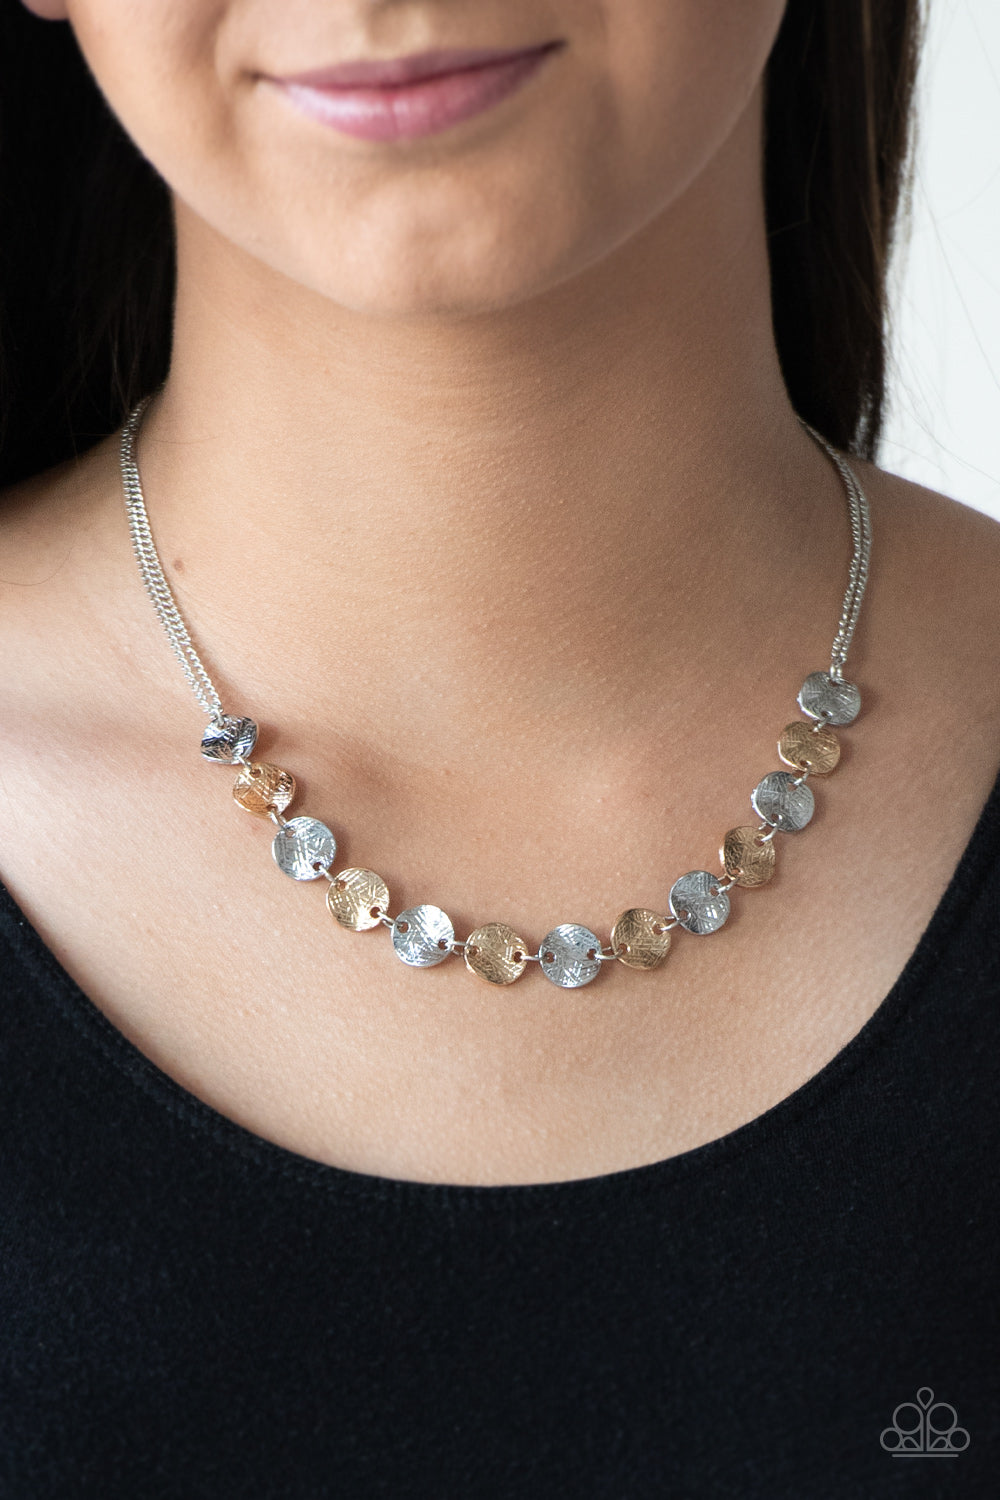 Paparazzi Simple Sheen Silver Necklace. Dainty Multi metal $5 Jewelry. Get Free Shipping.